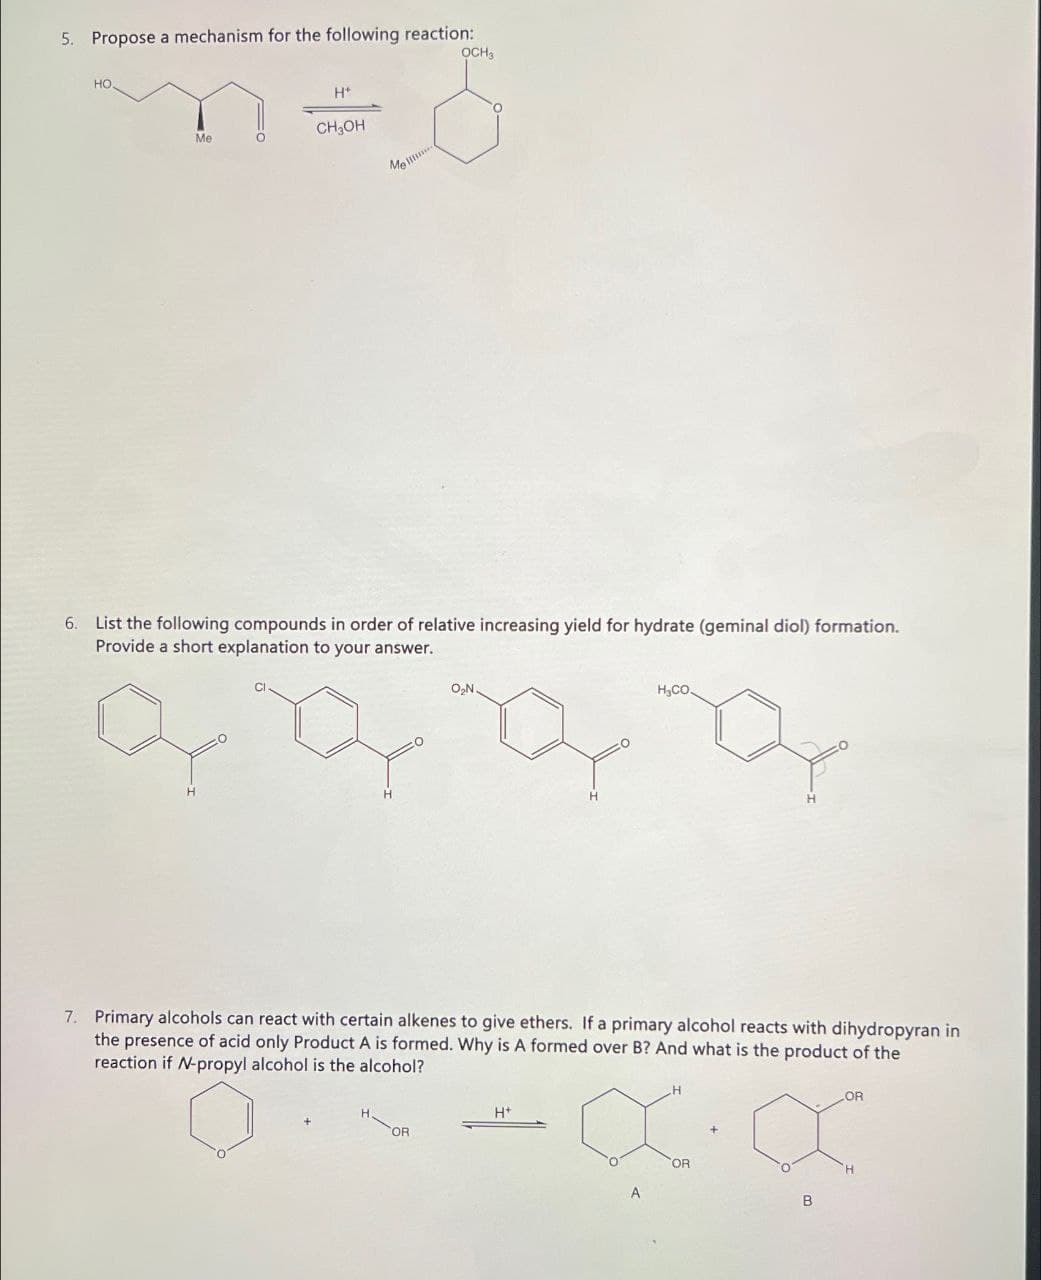 5. Propose a mechanism for the following reaction:
HO.
H+
Me
CH₂OH
Ме
OCH3
6. List the following compounds in order of relative increasing yield for hydrate (geminal diol) formation.
Provide a short explanation to your answer.
H
CI
O₂N.
HyCO.
H
H
7. Primary alcohols can react with certain alkenes to give ethers. If a primary alcohol reacts with dihydropyran in
the presence of acid only Product A is formed. Why is A formed over B? And what is the product of the
reaction if N-propyl alcohol is the alcohol?
H+
OR
H
OR
LOR
H
B